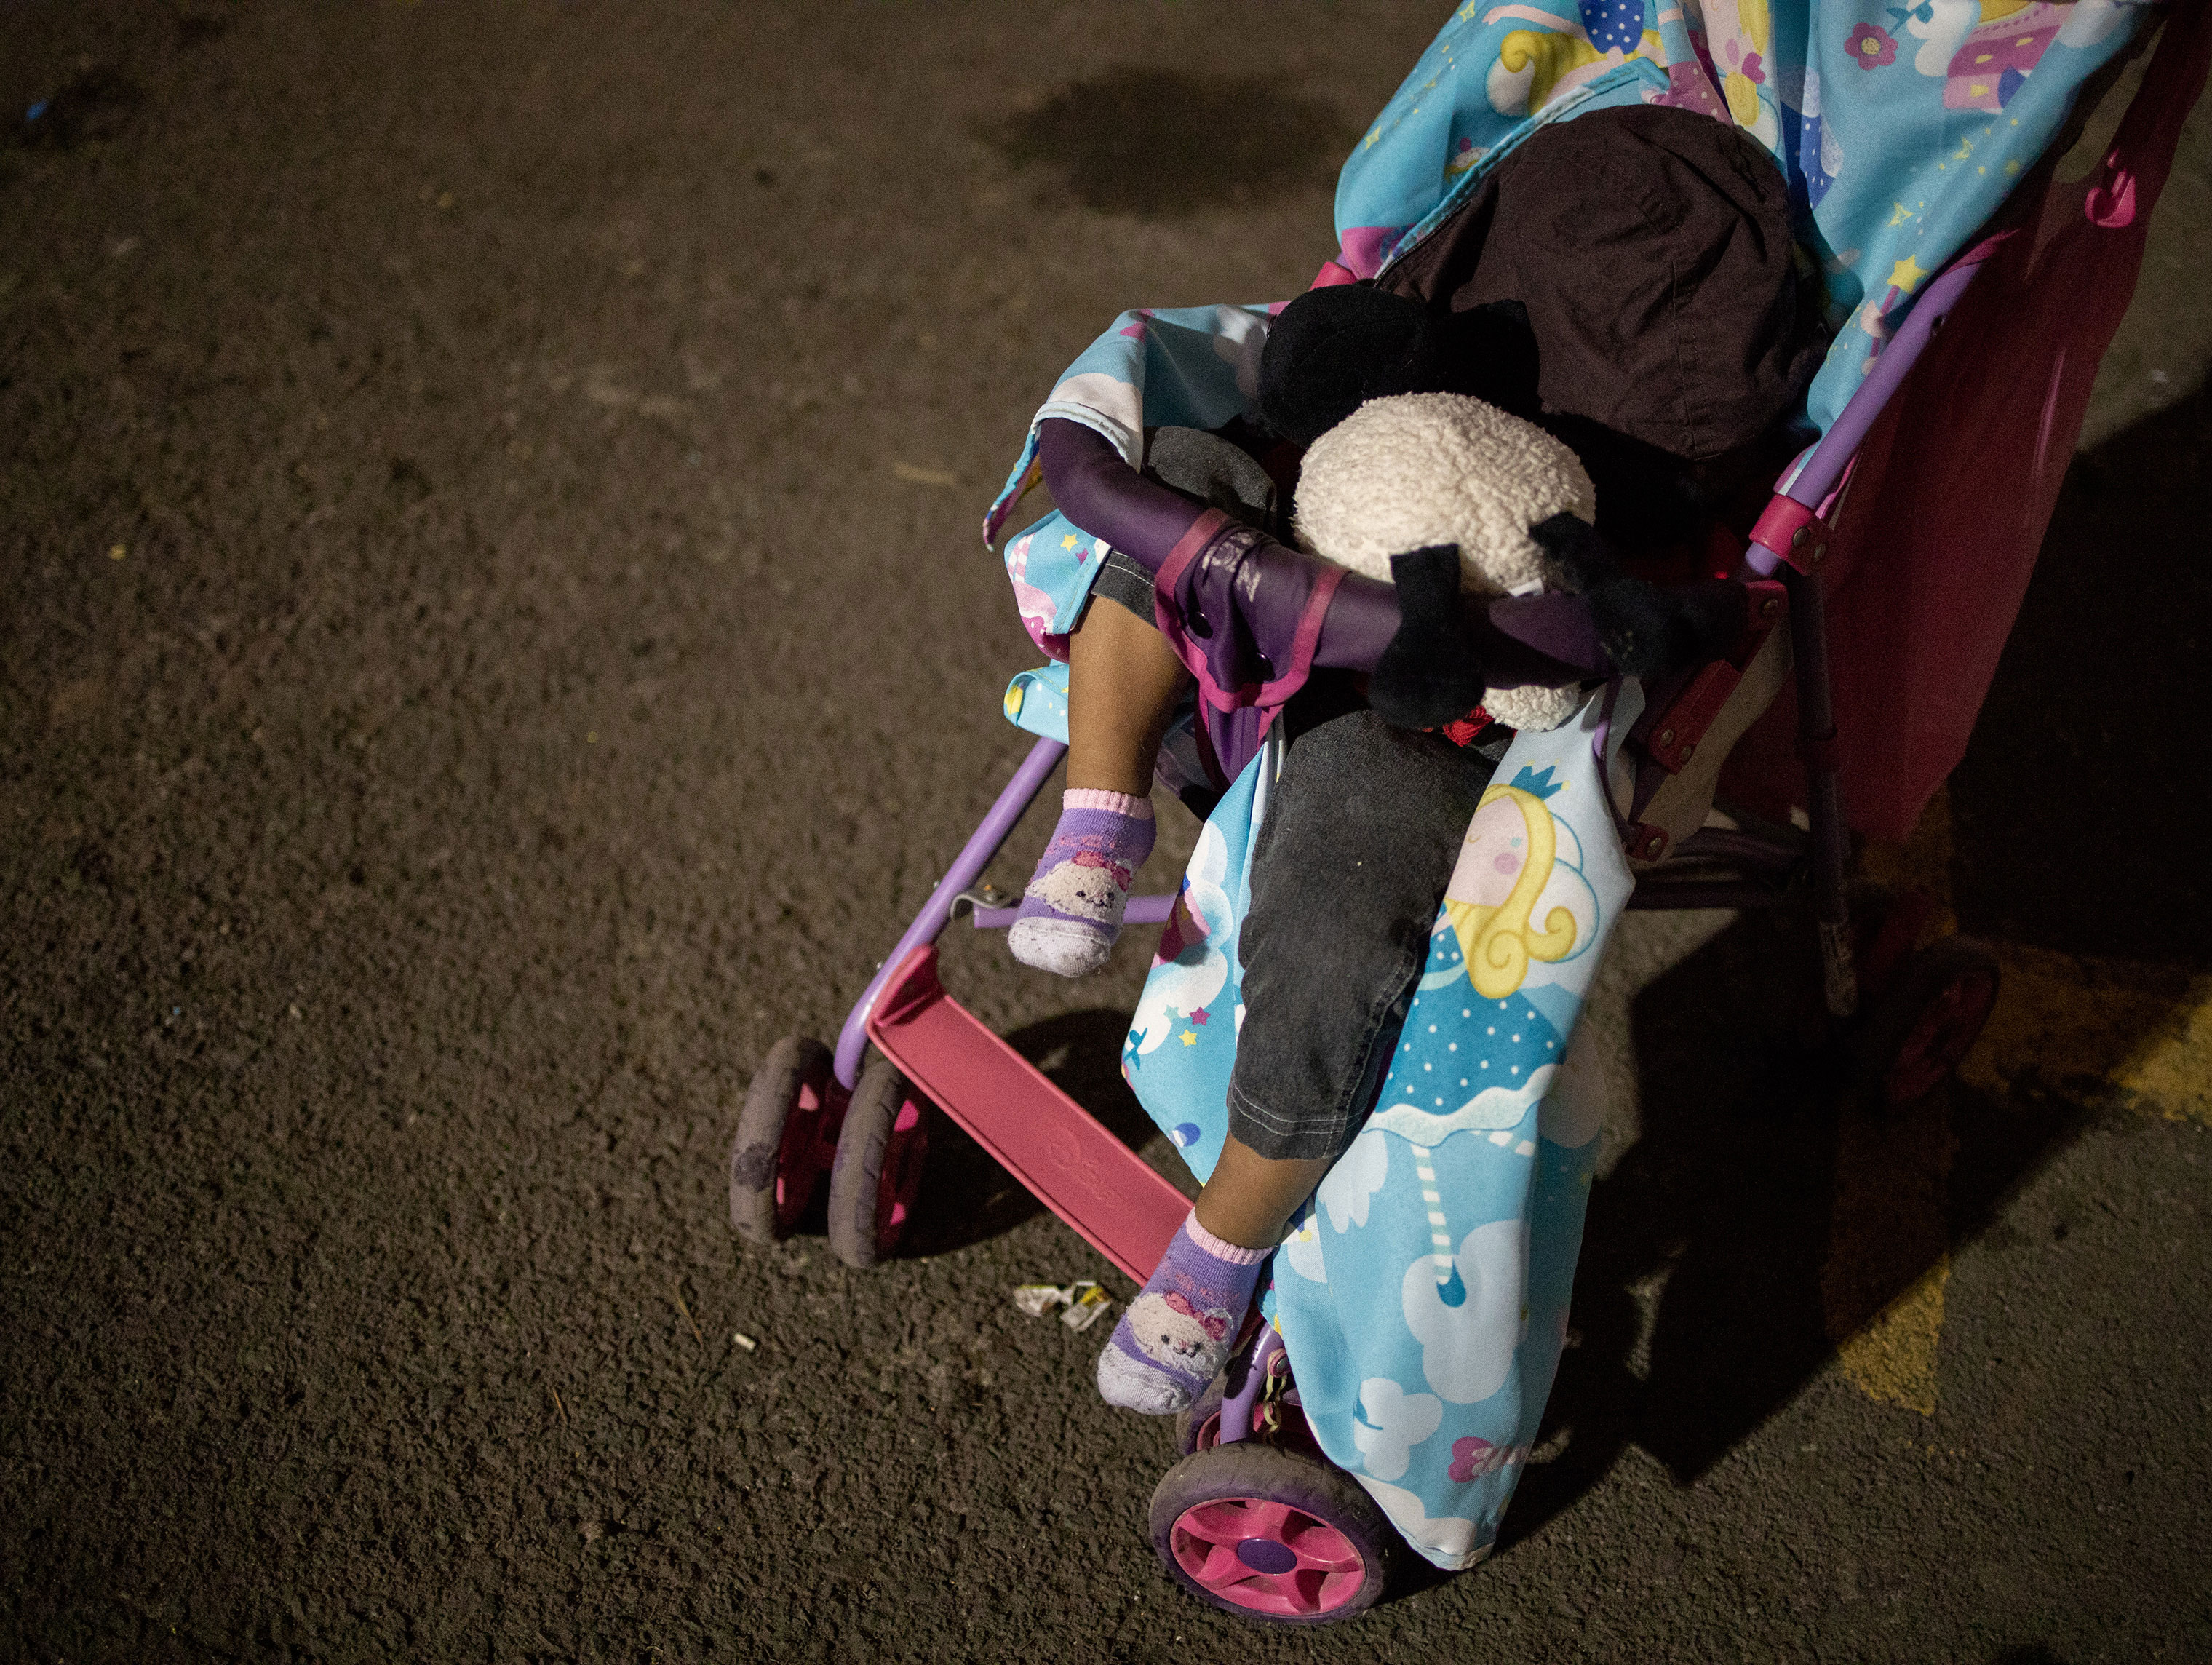 A baby who has just arrived the Jesus Martinez stadium, in Mexico City sleeps as his parents sort through donated clothes nearby, on Nov. 4, 2018. (Jerome Sessini—Magnum Photos for TIME)